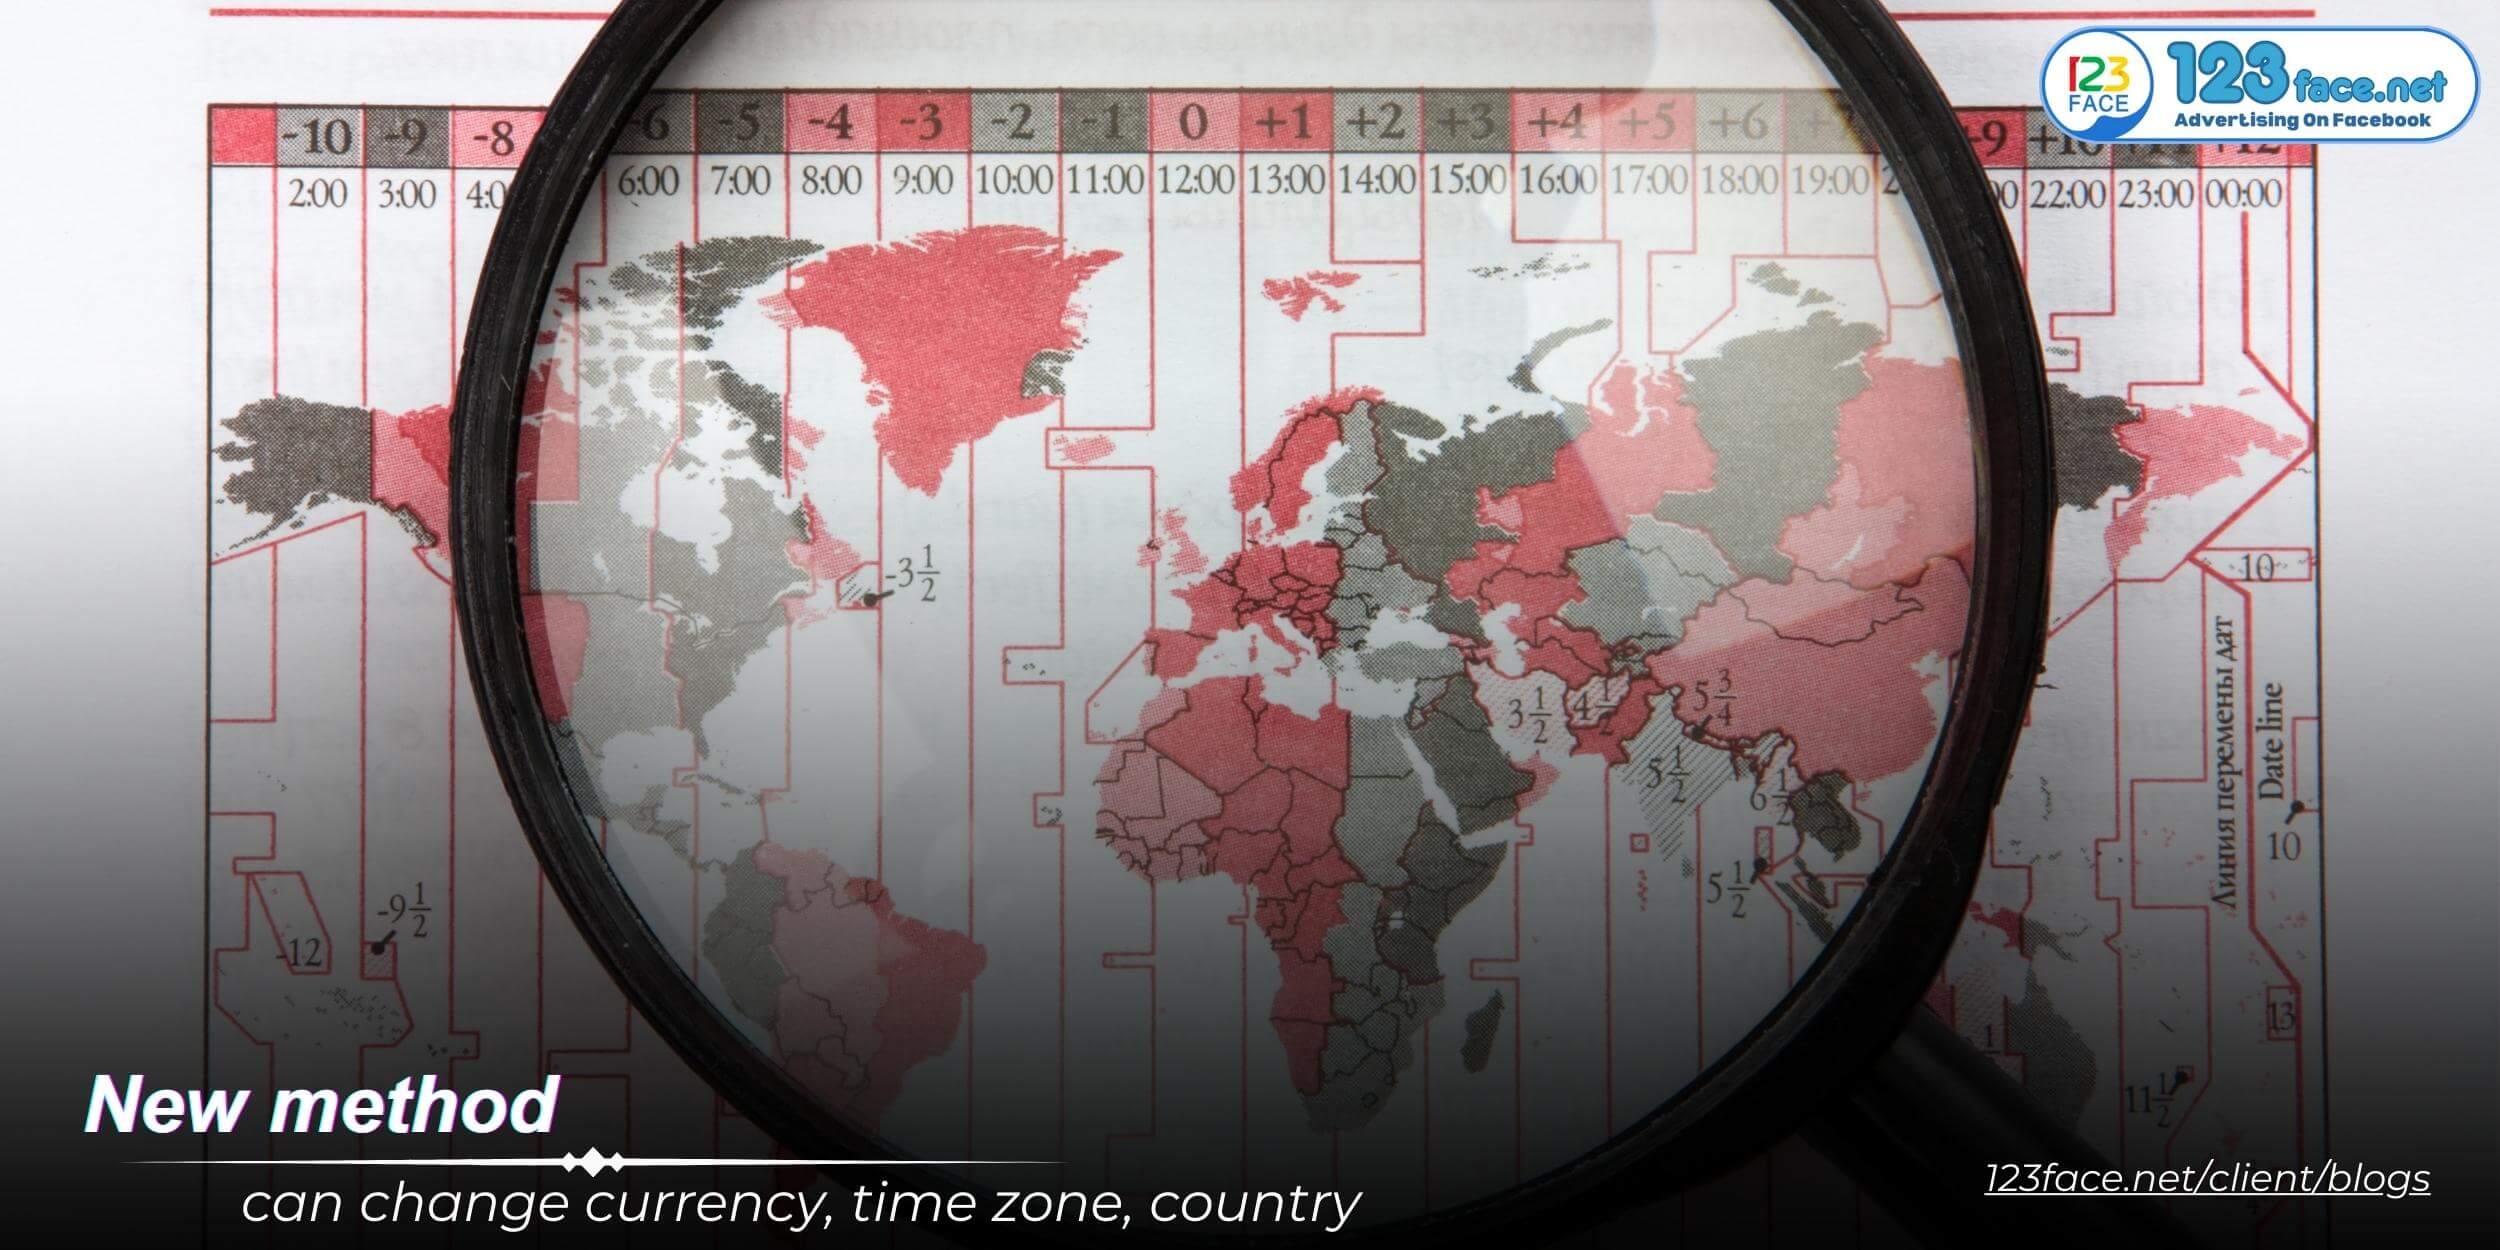 New method can change currency, time zone, country